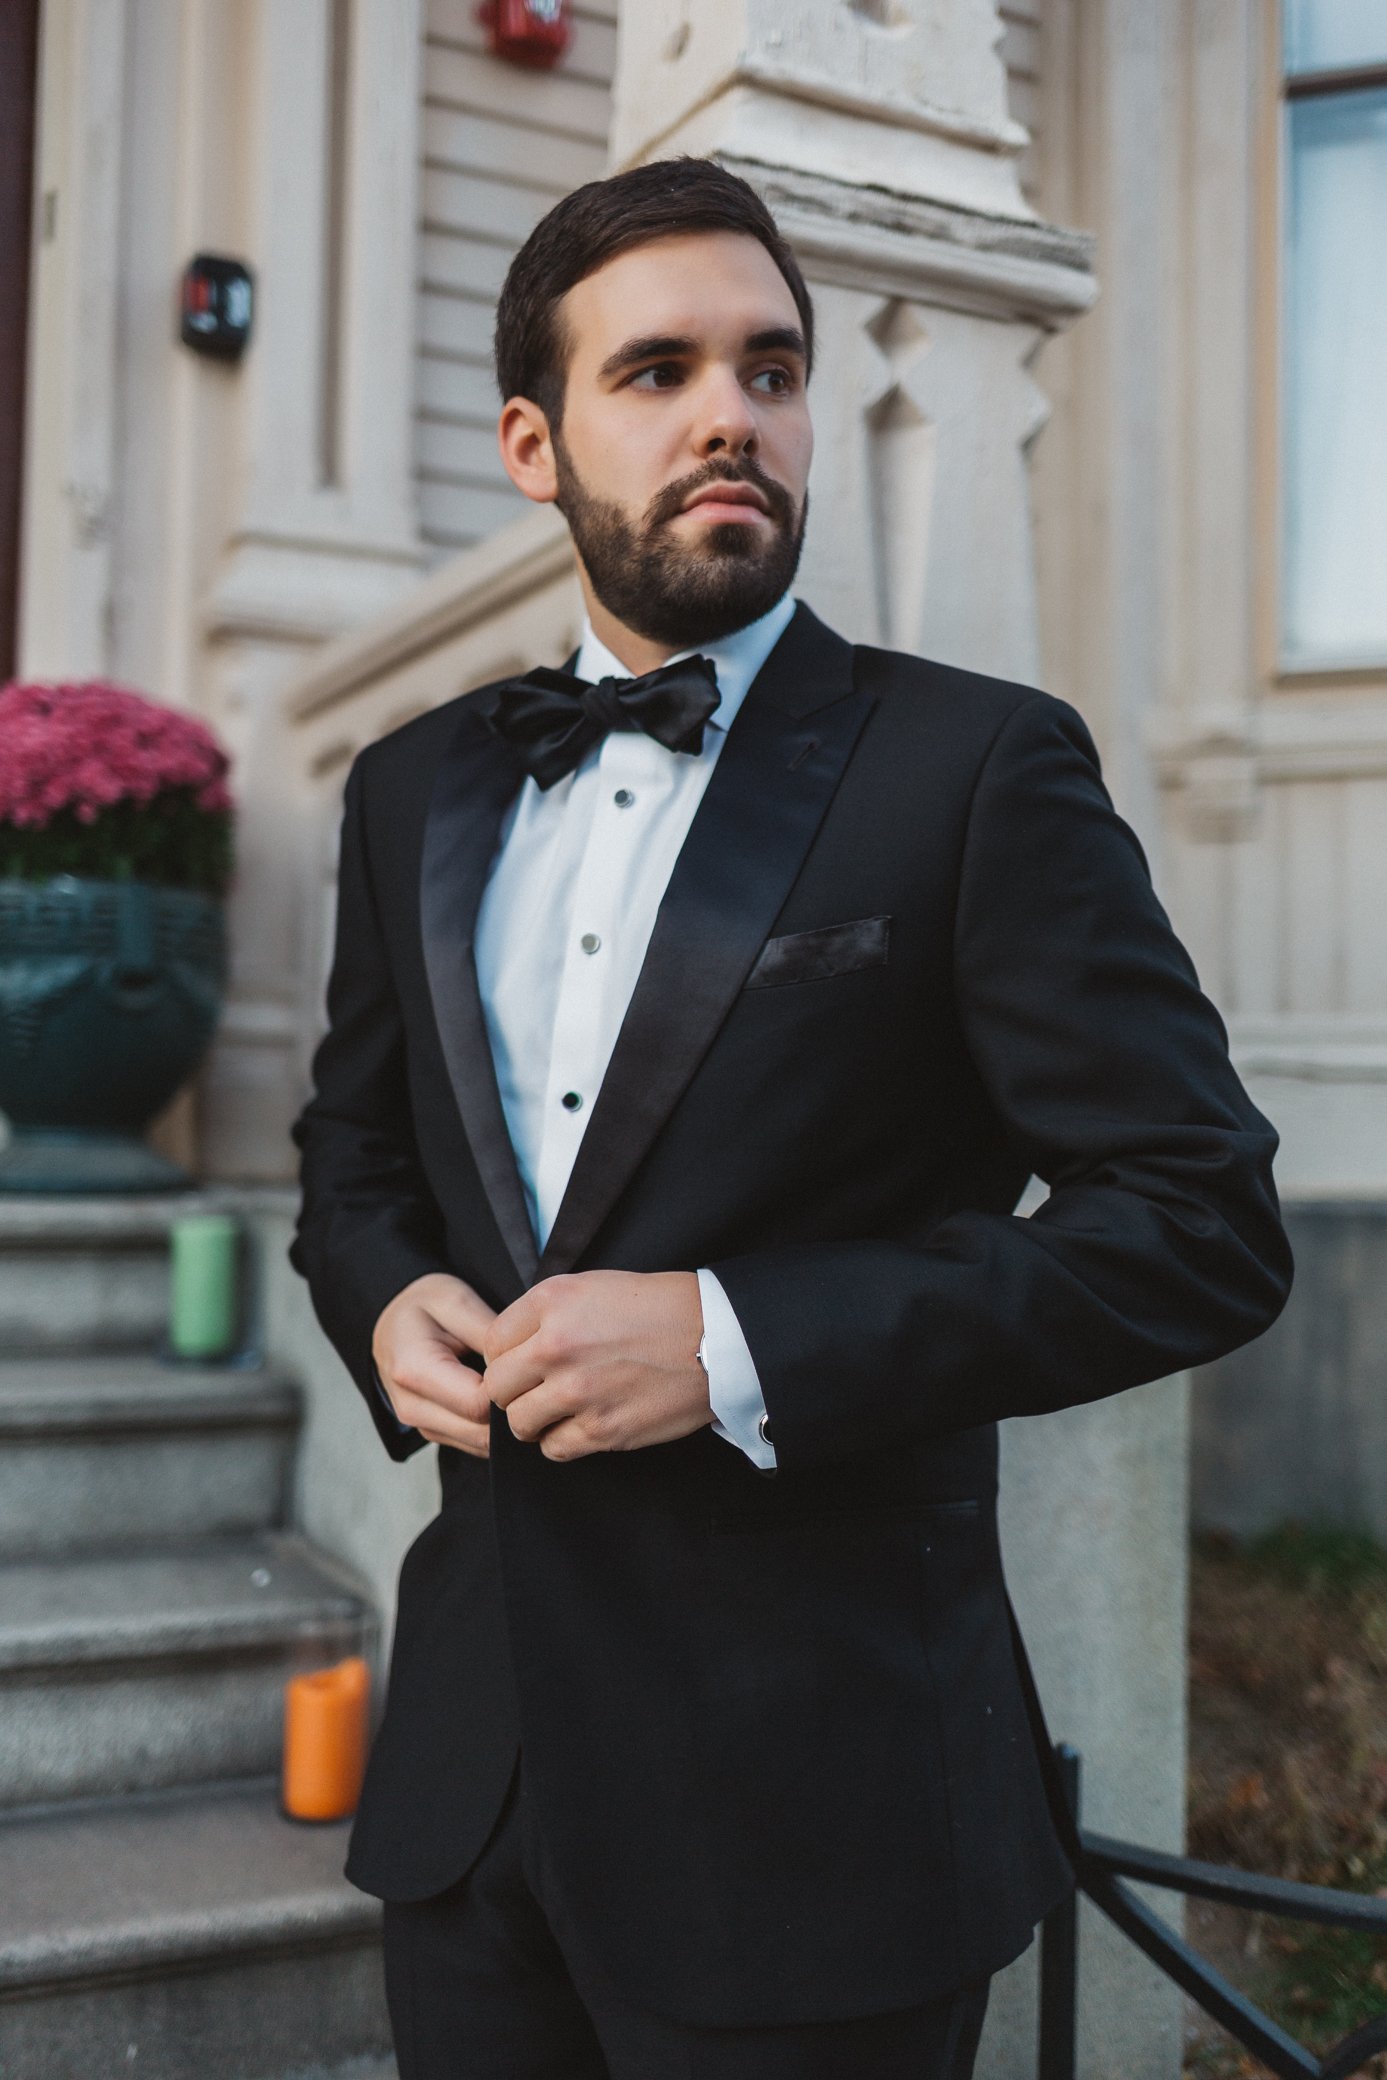 Attending a gala for the first time? Here are a few prep tips for the guys and gals | bygabriella.co